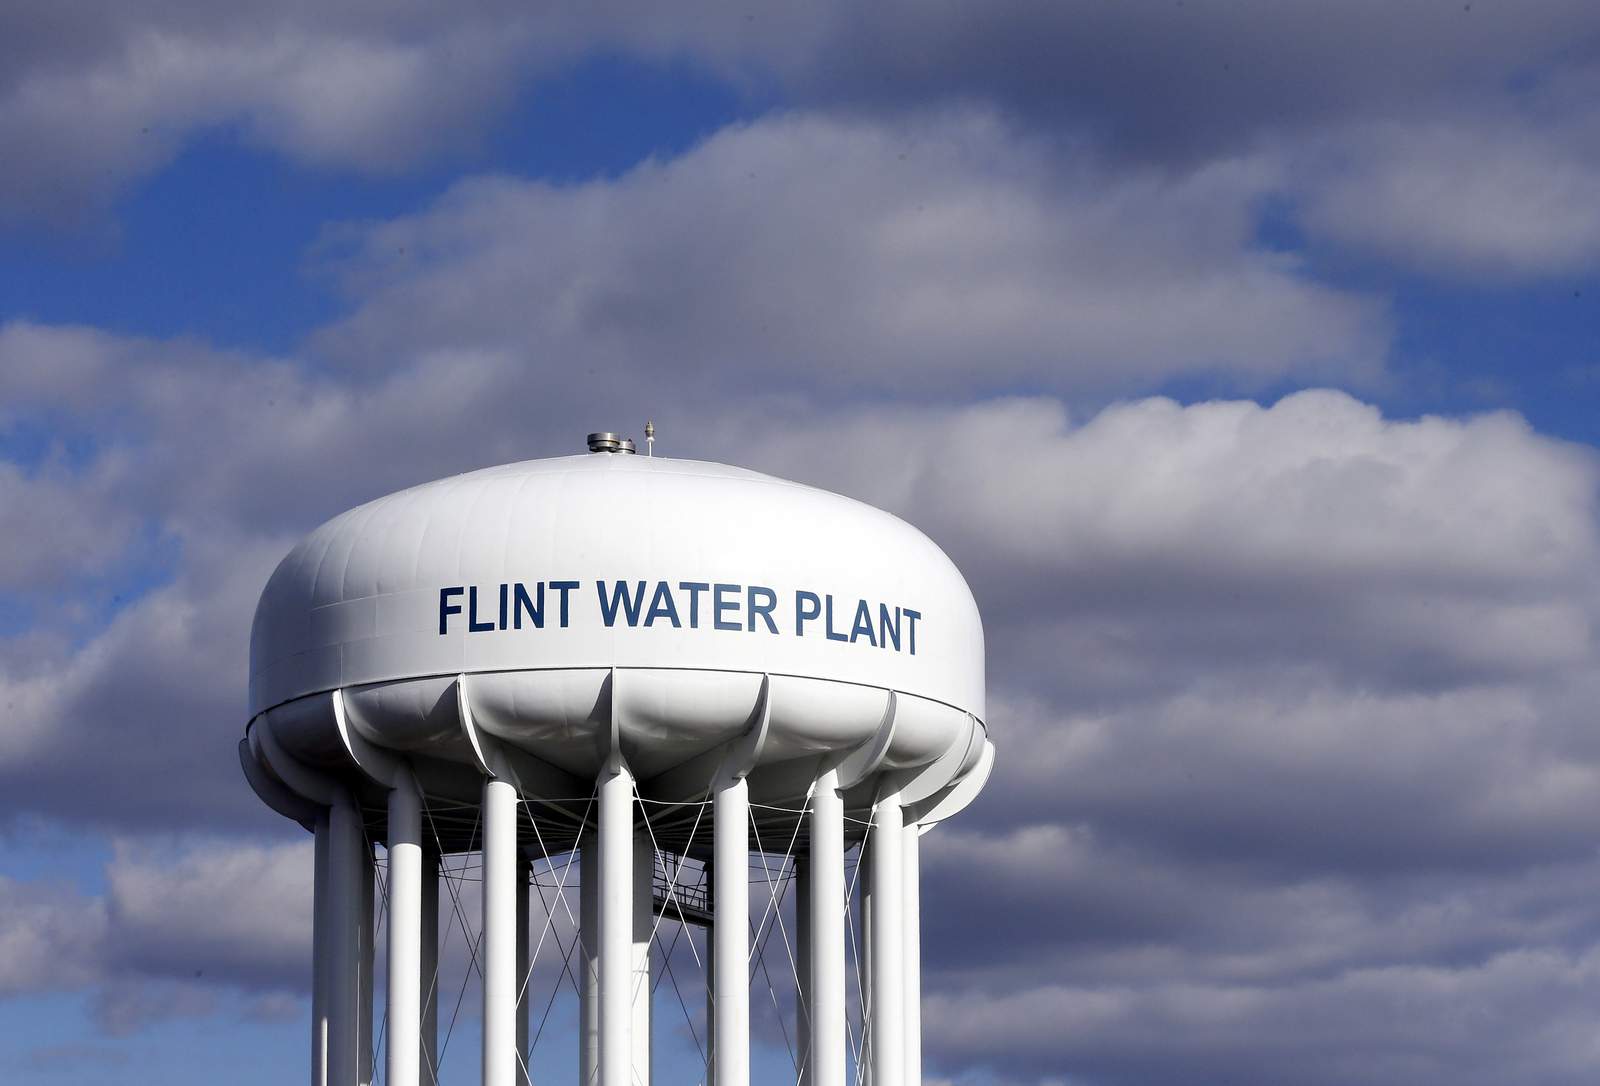 6 years after it started, Michigan reaches $600M settlement for Flint water crisis lawsuits